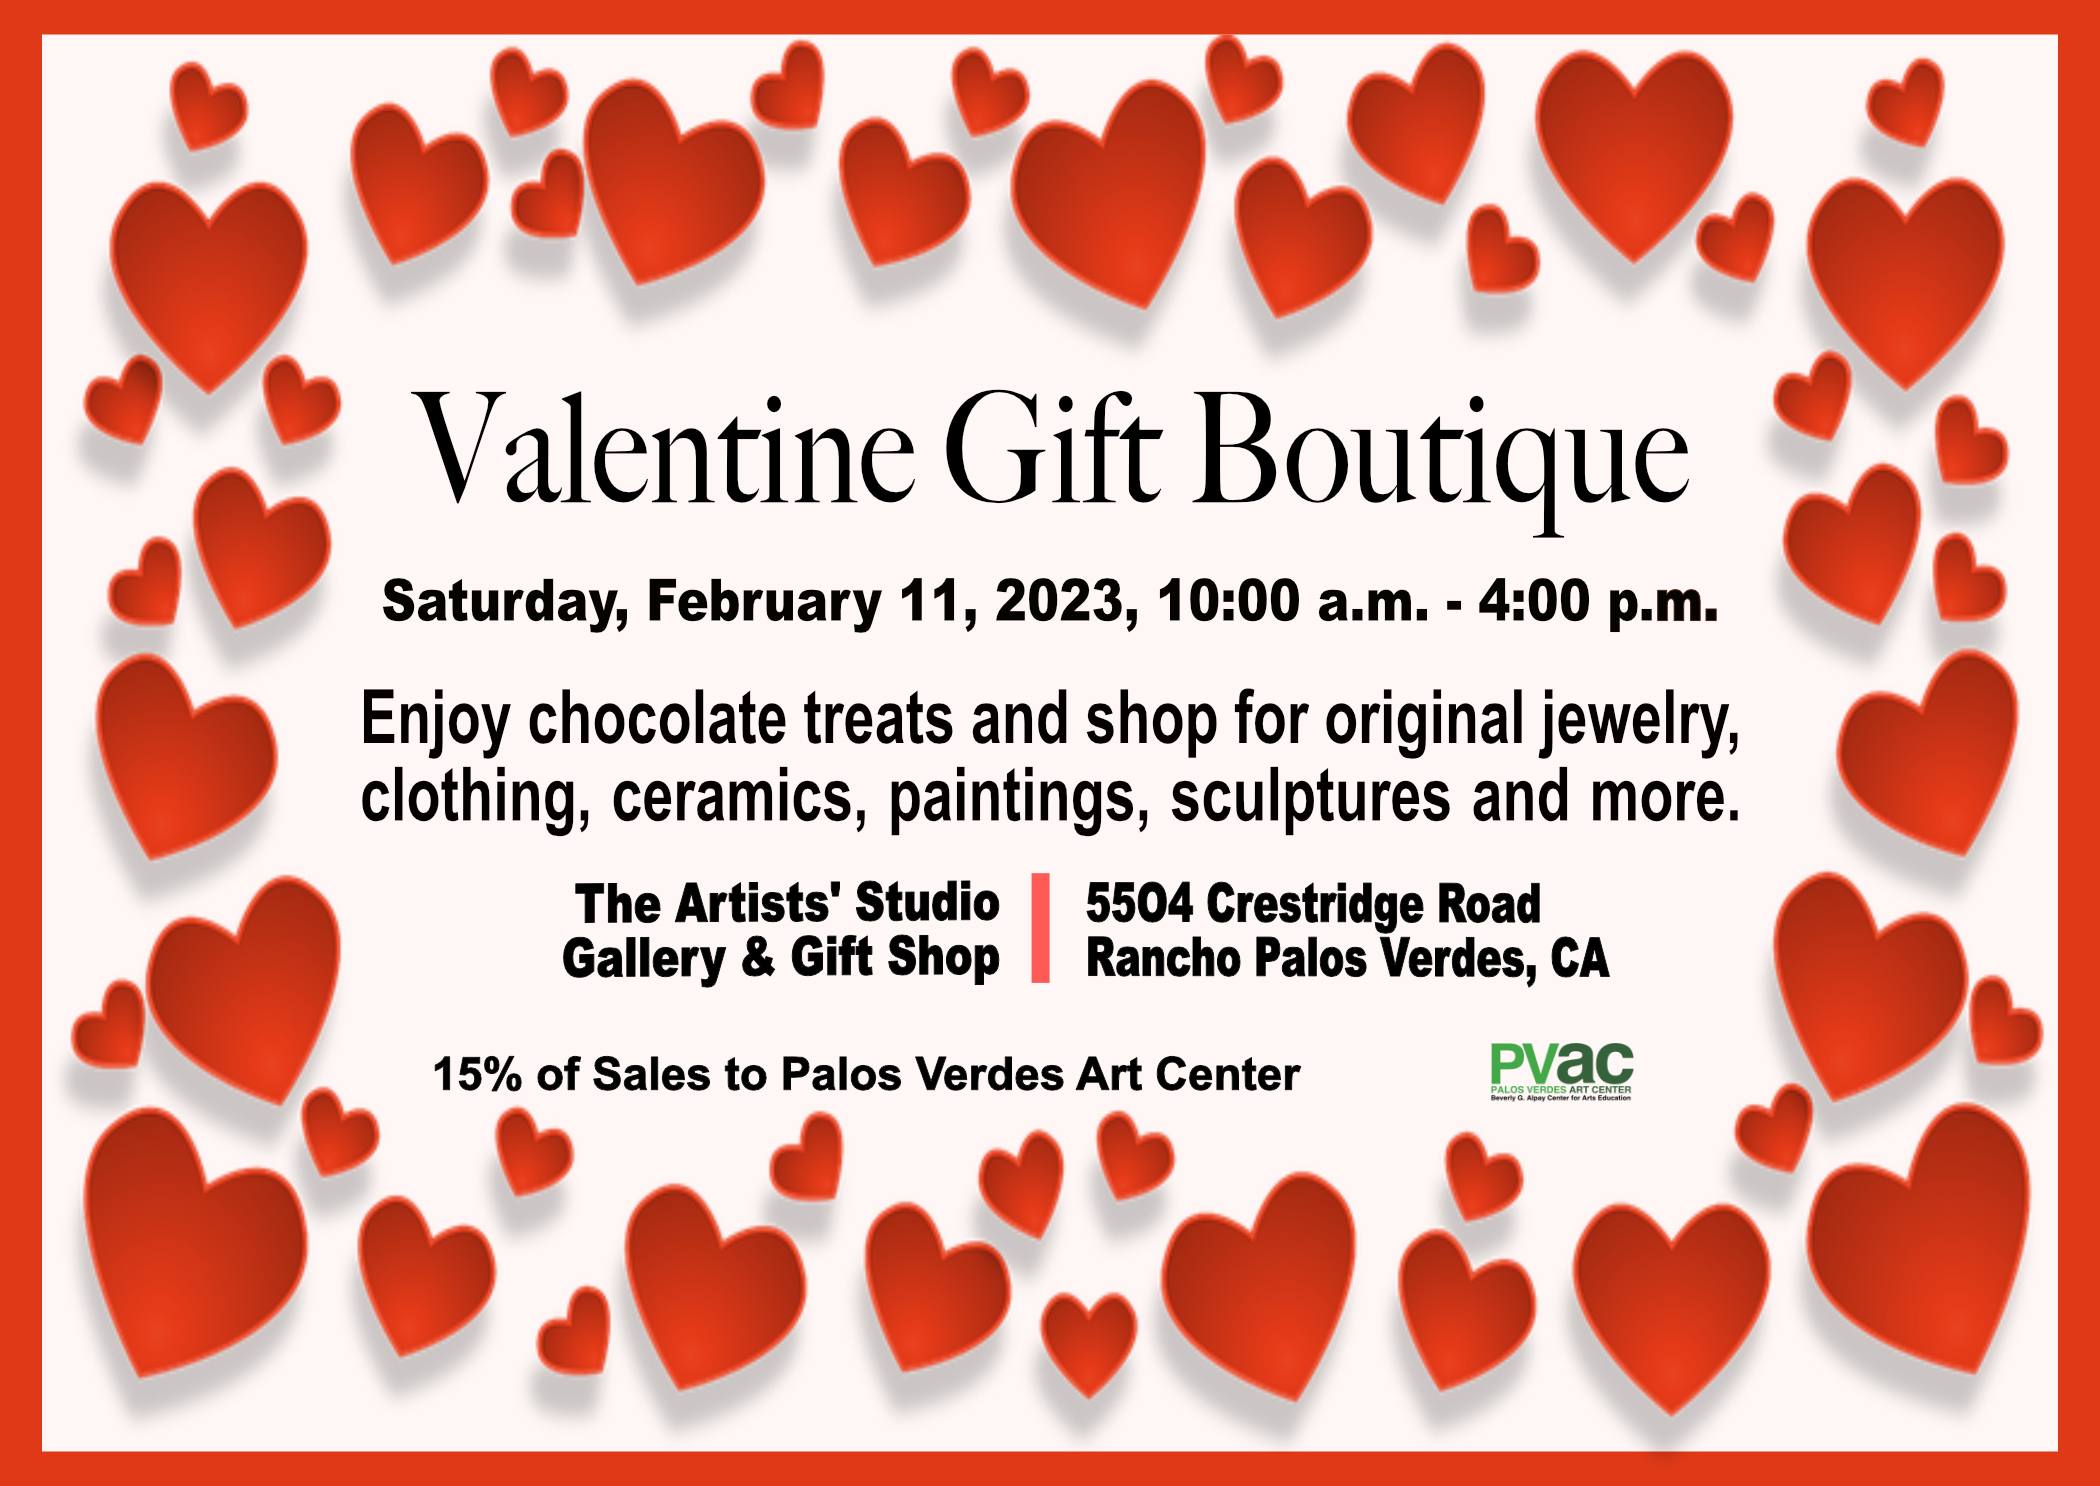 The jewelry artists will host an event in the The Artists' Studio Gallery and Gift Shop at the Palos Verdes Art Center on Saturday, February 11, 2023, 10:00 a.m - 4:00 p.m.  Jewelers will help clients select the perfect Valentine gifts and there will be chocolate.